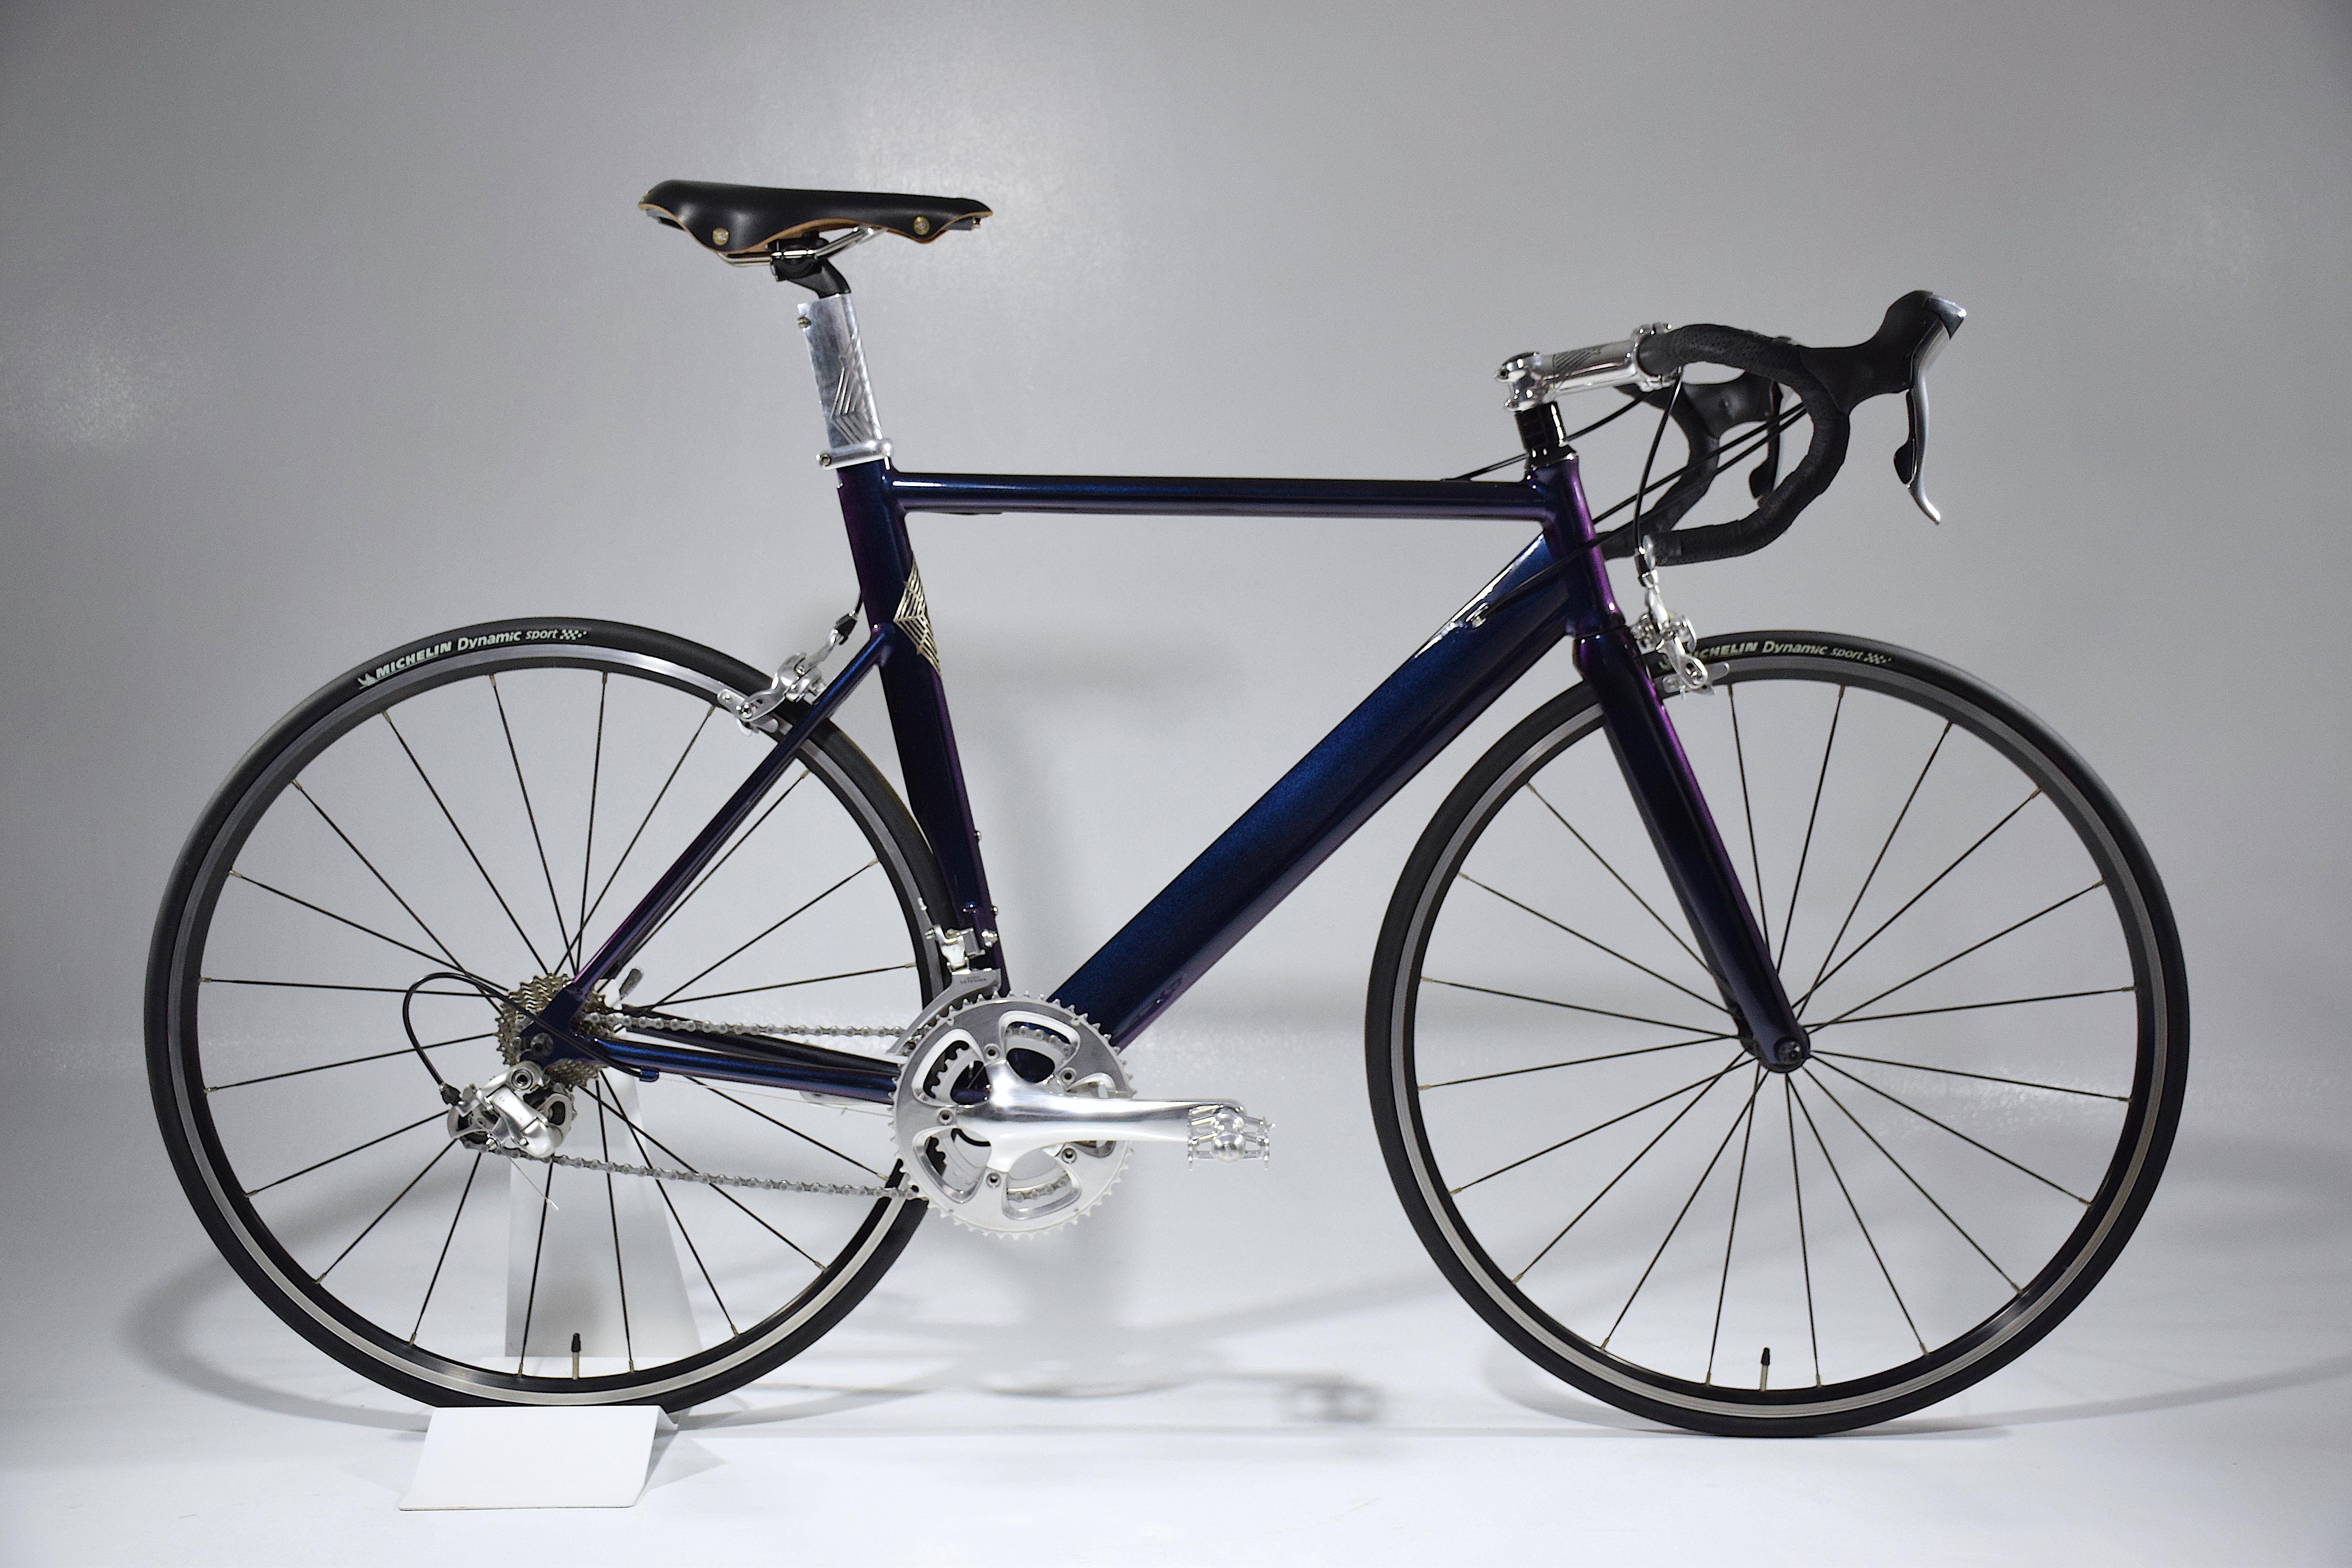 The Venodi 043 is a bespoke road bike built with a vintage light aluminum Cervelo frame and upcycled with our studio's artisan know-hows, new components, and quality materials. 
All technical details are included in the last image. 
Size: 52cm